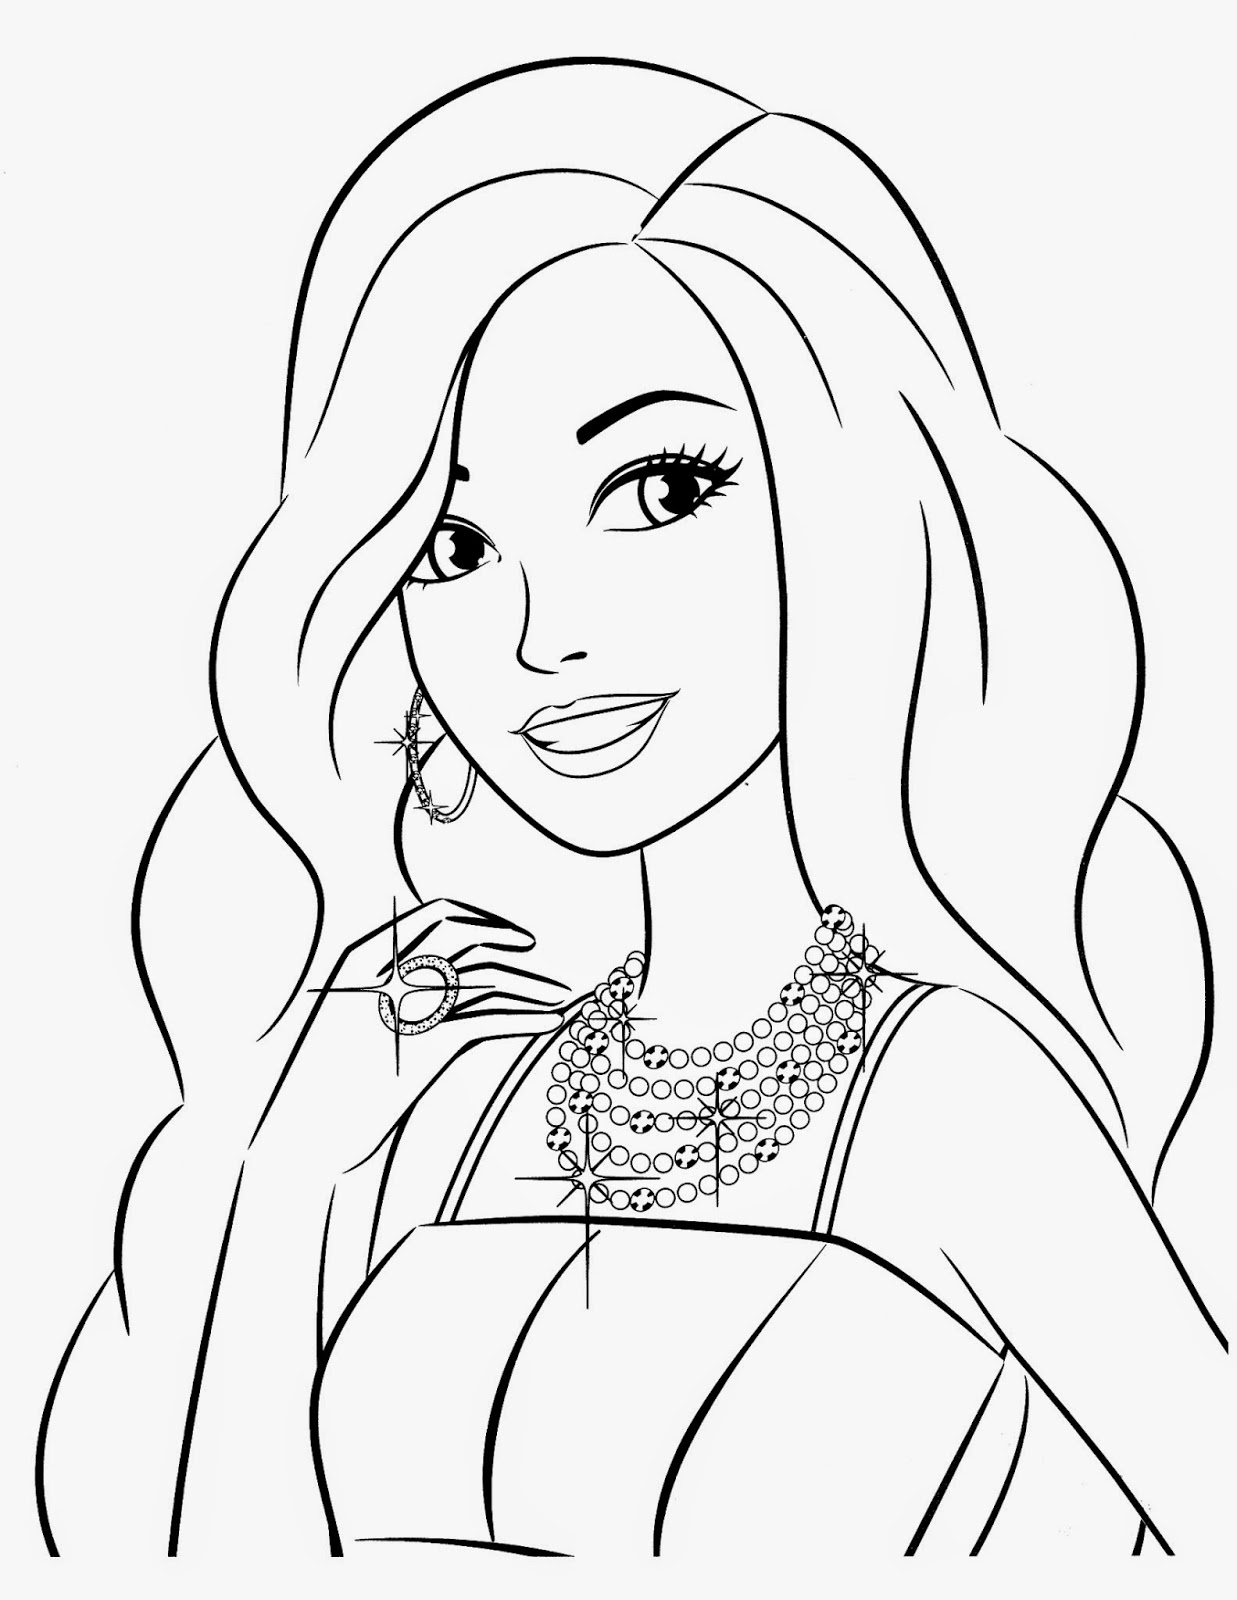 Download Coloring Pages: Barbie Free Printable Coloring Pages